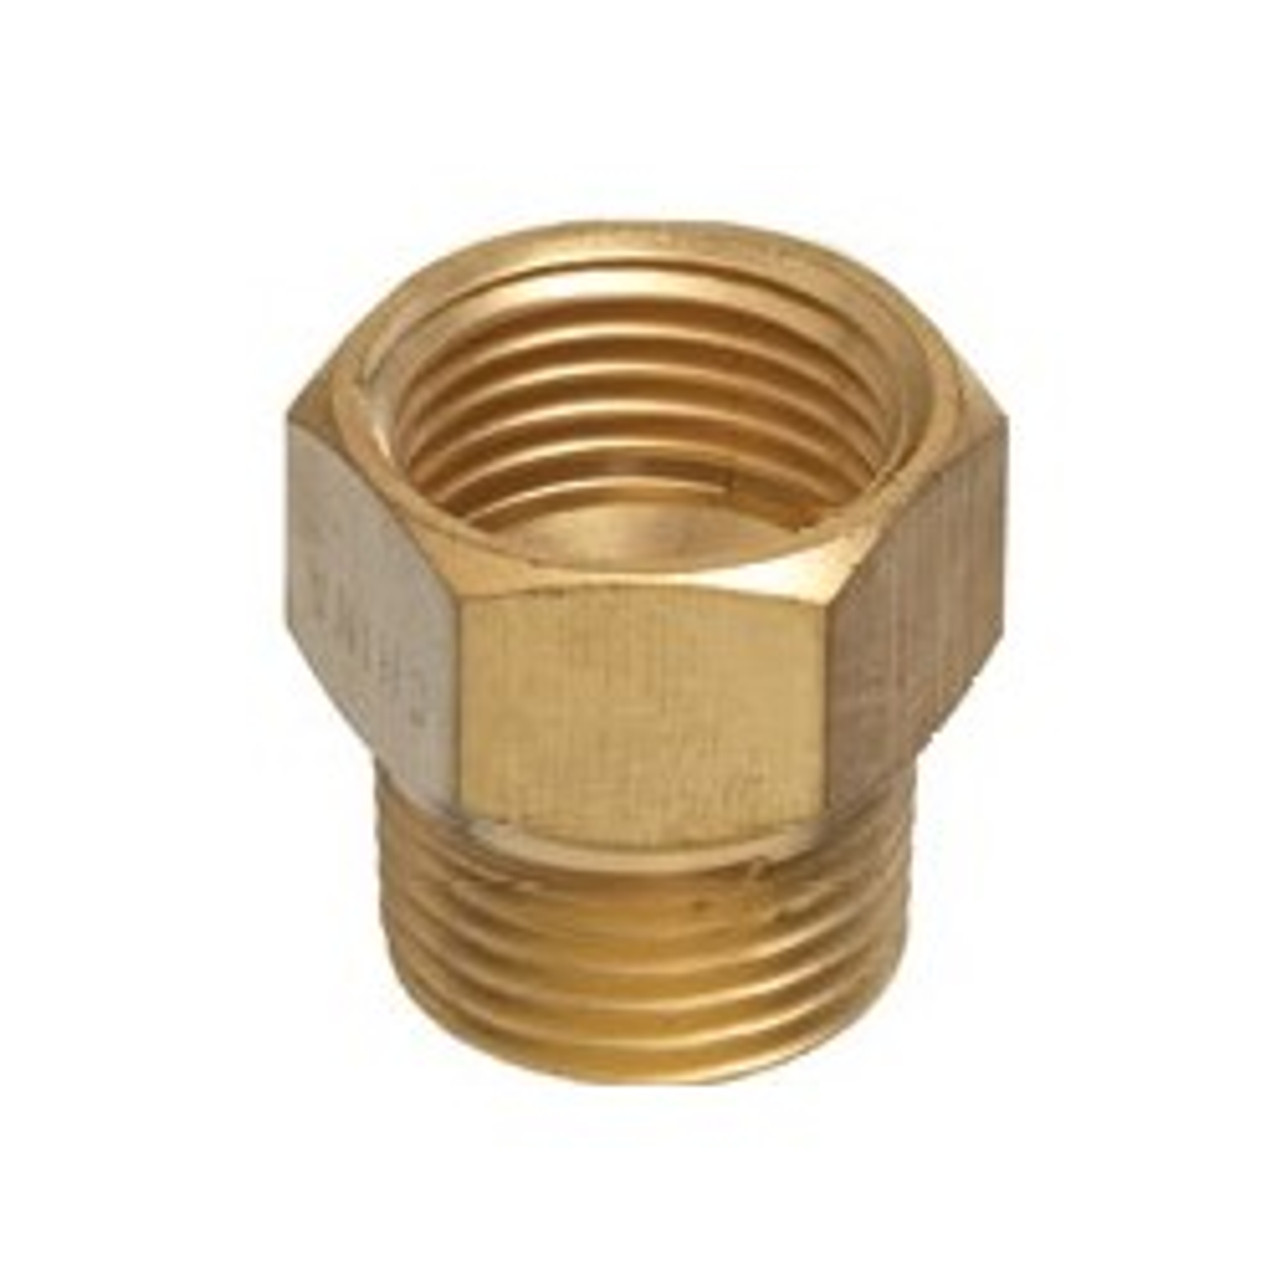 Brass Fire Sprinkler Head Extensions - Available Multiple Sizes